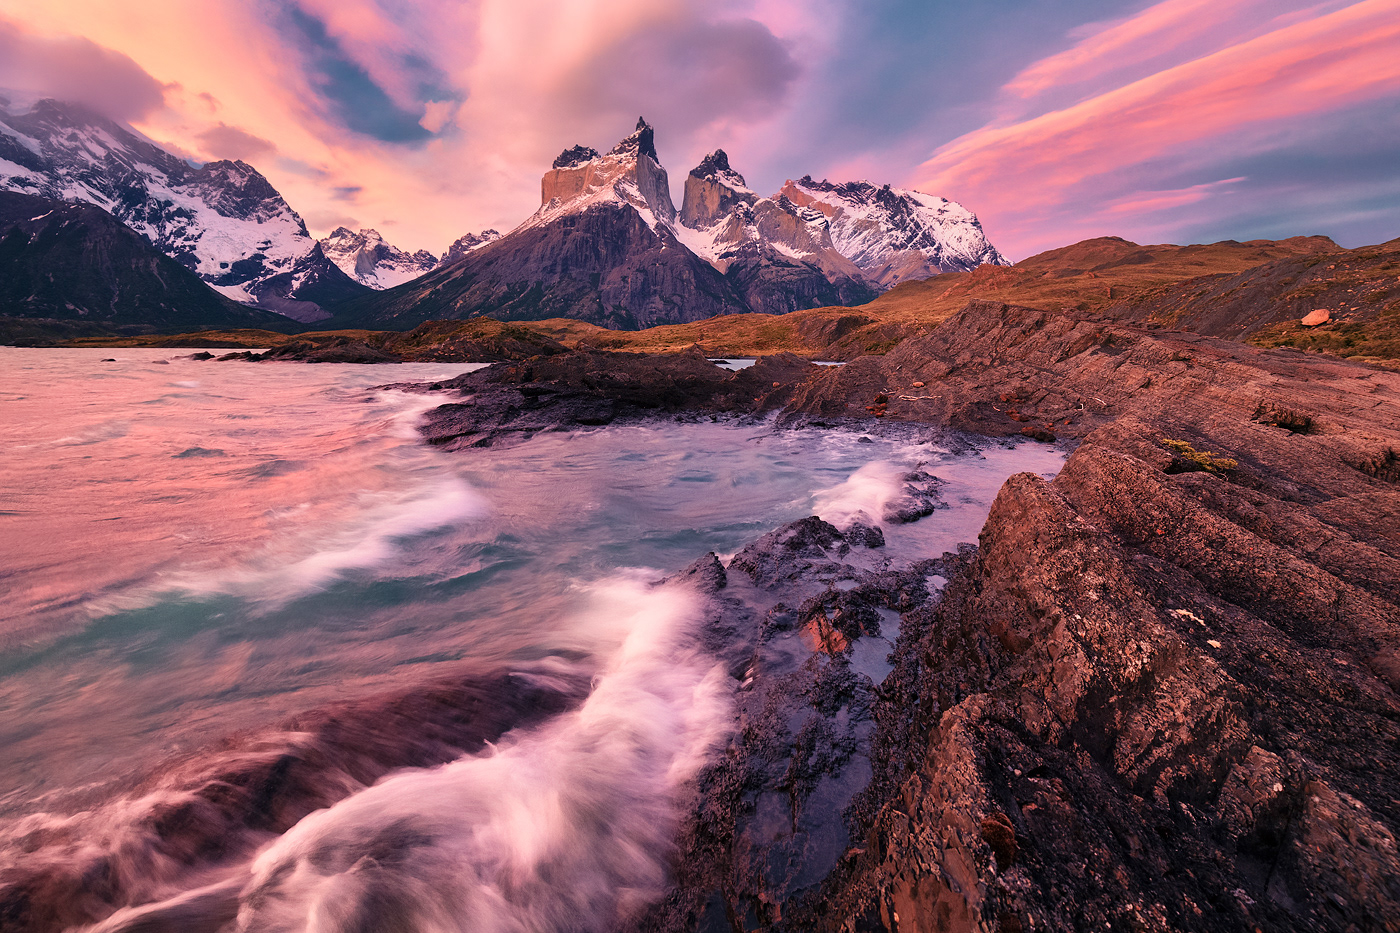 patagonia chile argentina mountains Landscape Photography  Nature Travel adventure outdoors